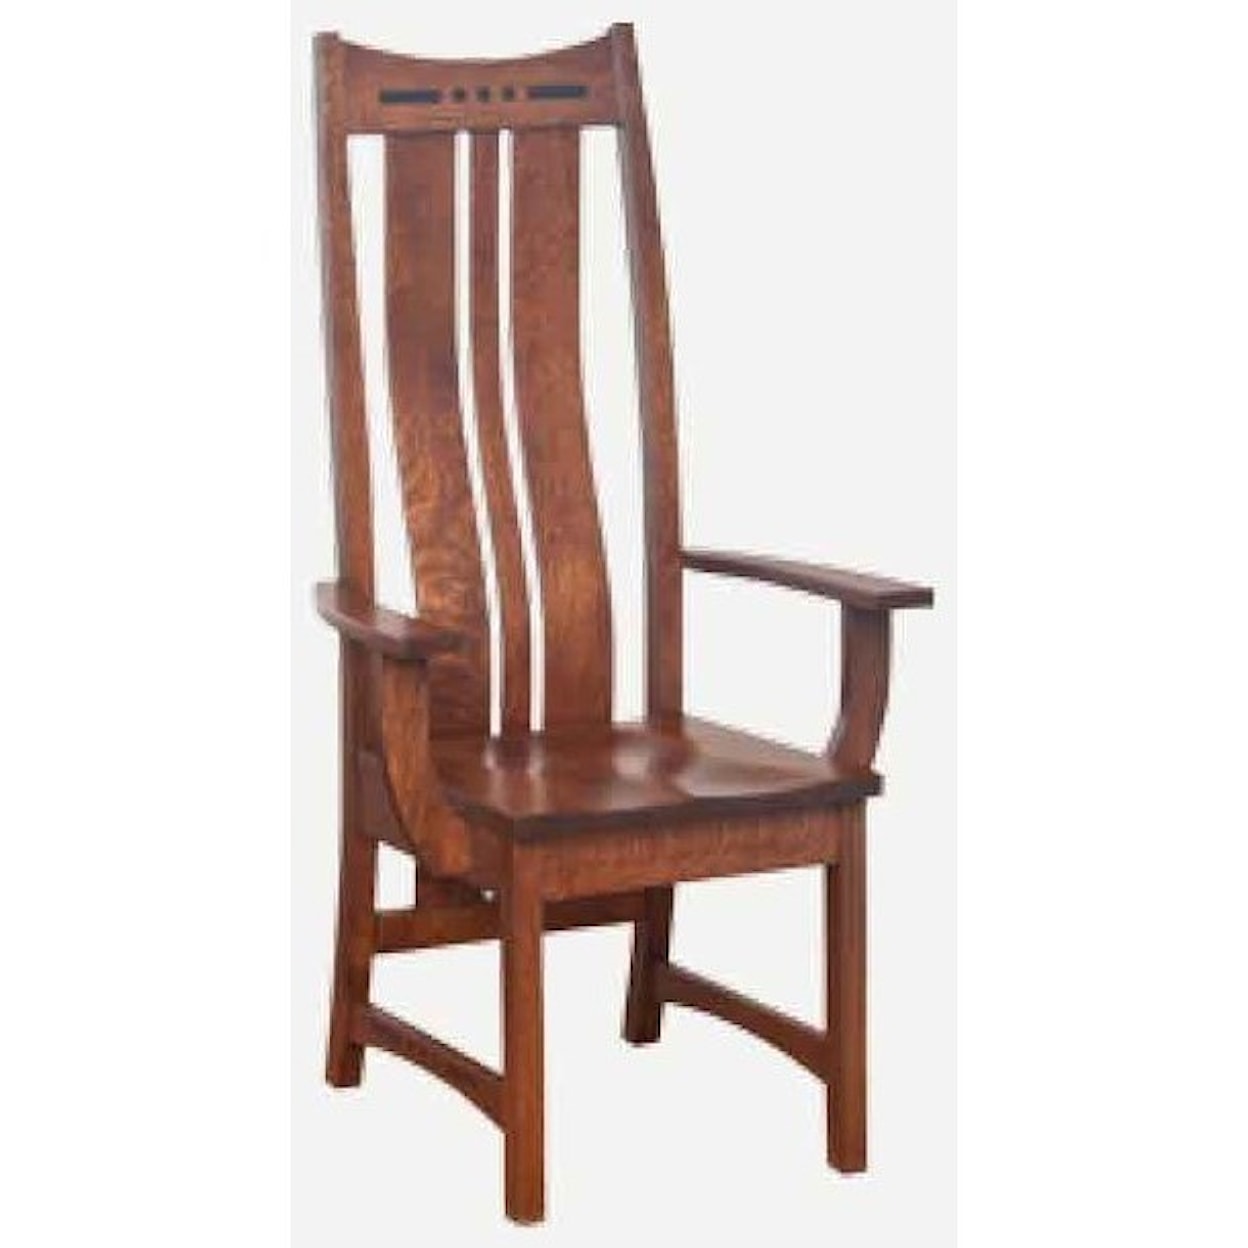 Amish Impressions by Fusion Designs Hayworth High Back Arm Chair - Leather Seat